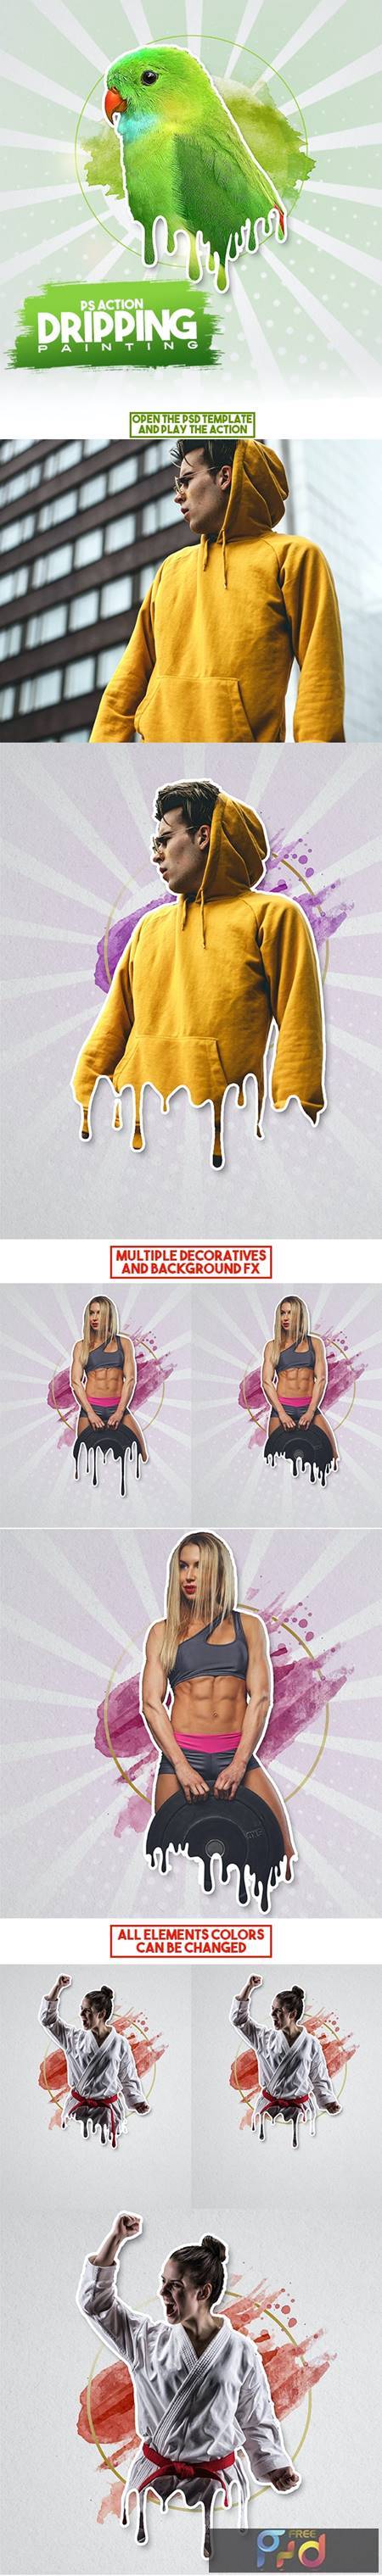 Dripping Painting Photoshop Action 26711684 1